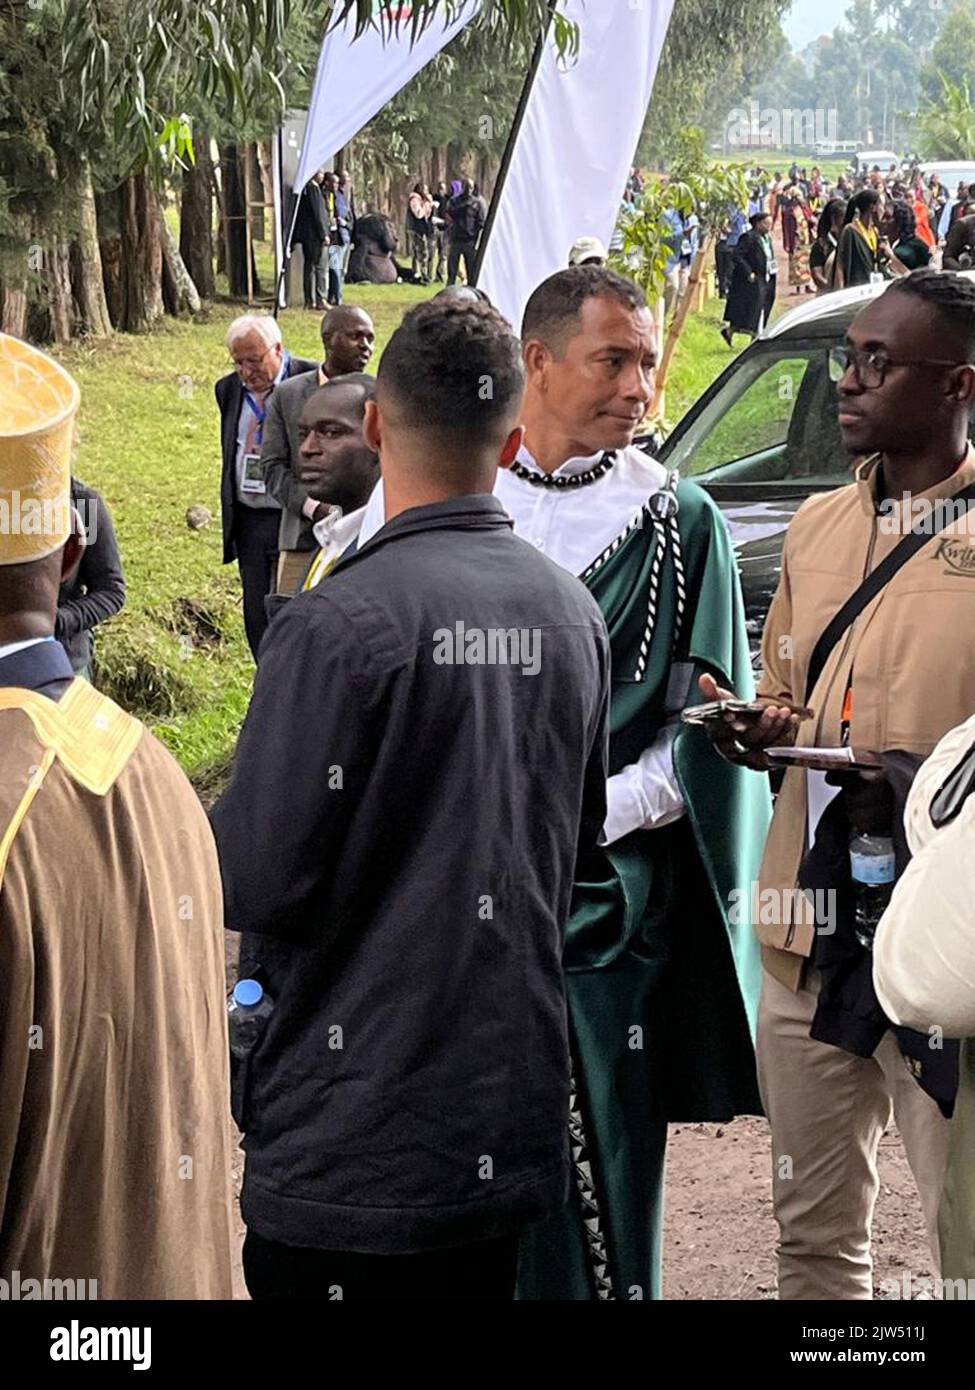 Nyungwe, Rwanda  - 2nd September, 2022 Brazilian International and former Arsenal Footballer - Gilberto Silva names a gorilla, in the famous Rwandan “Gorilla naming ceremony”  - in the rain forest area where famous wild life explorers Diane Fossey and Sir Richard Attenborough travelled years ago Stock Photo